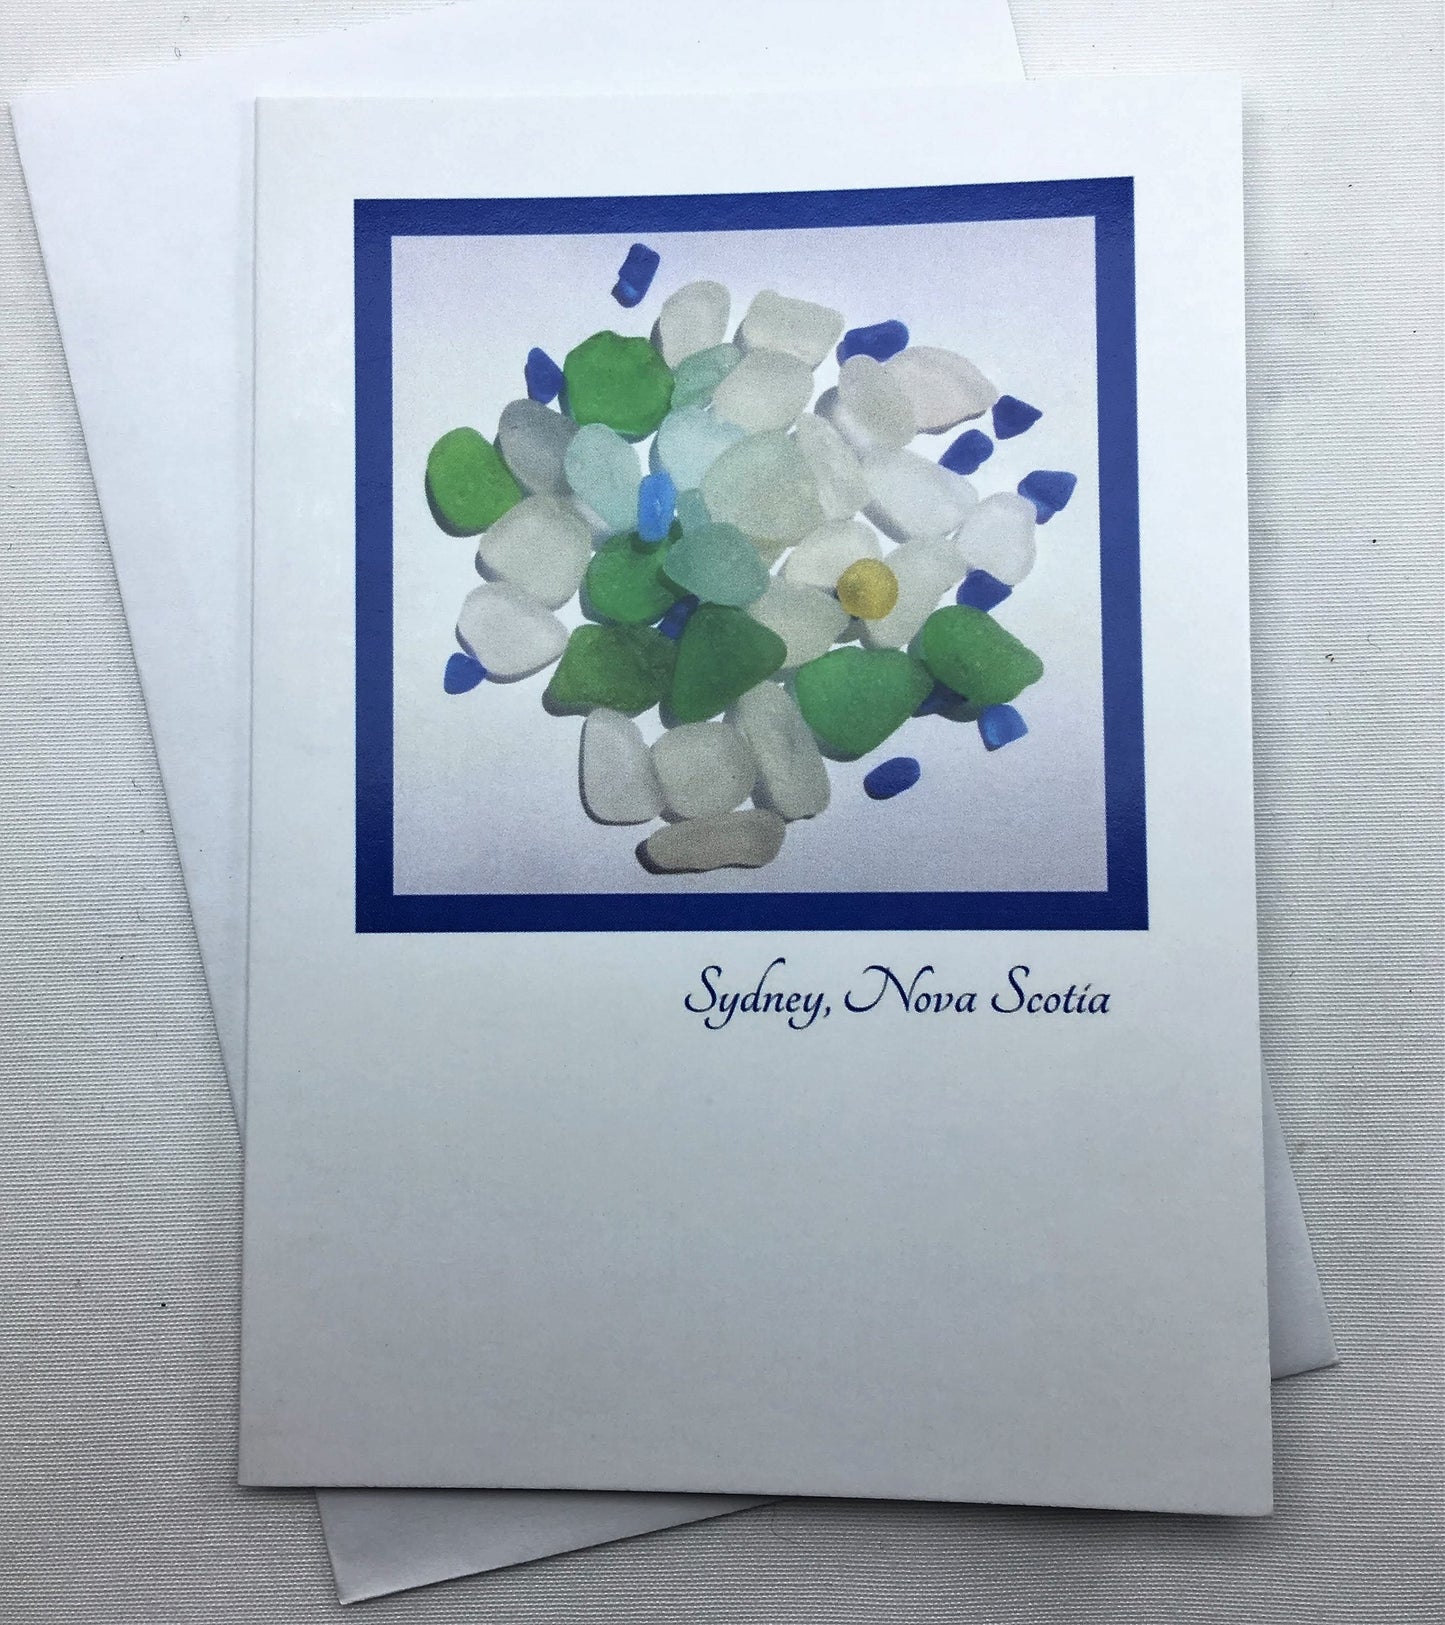 Set of 4 Note Cards - Nova Scotia and Northern California Sea Glass Collections (includes envelopes)